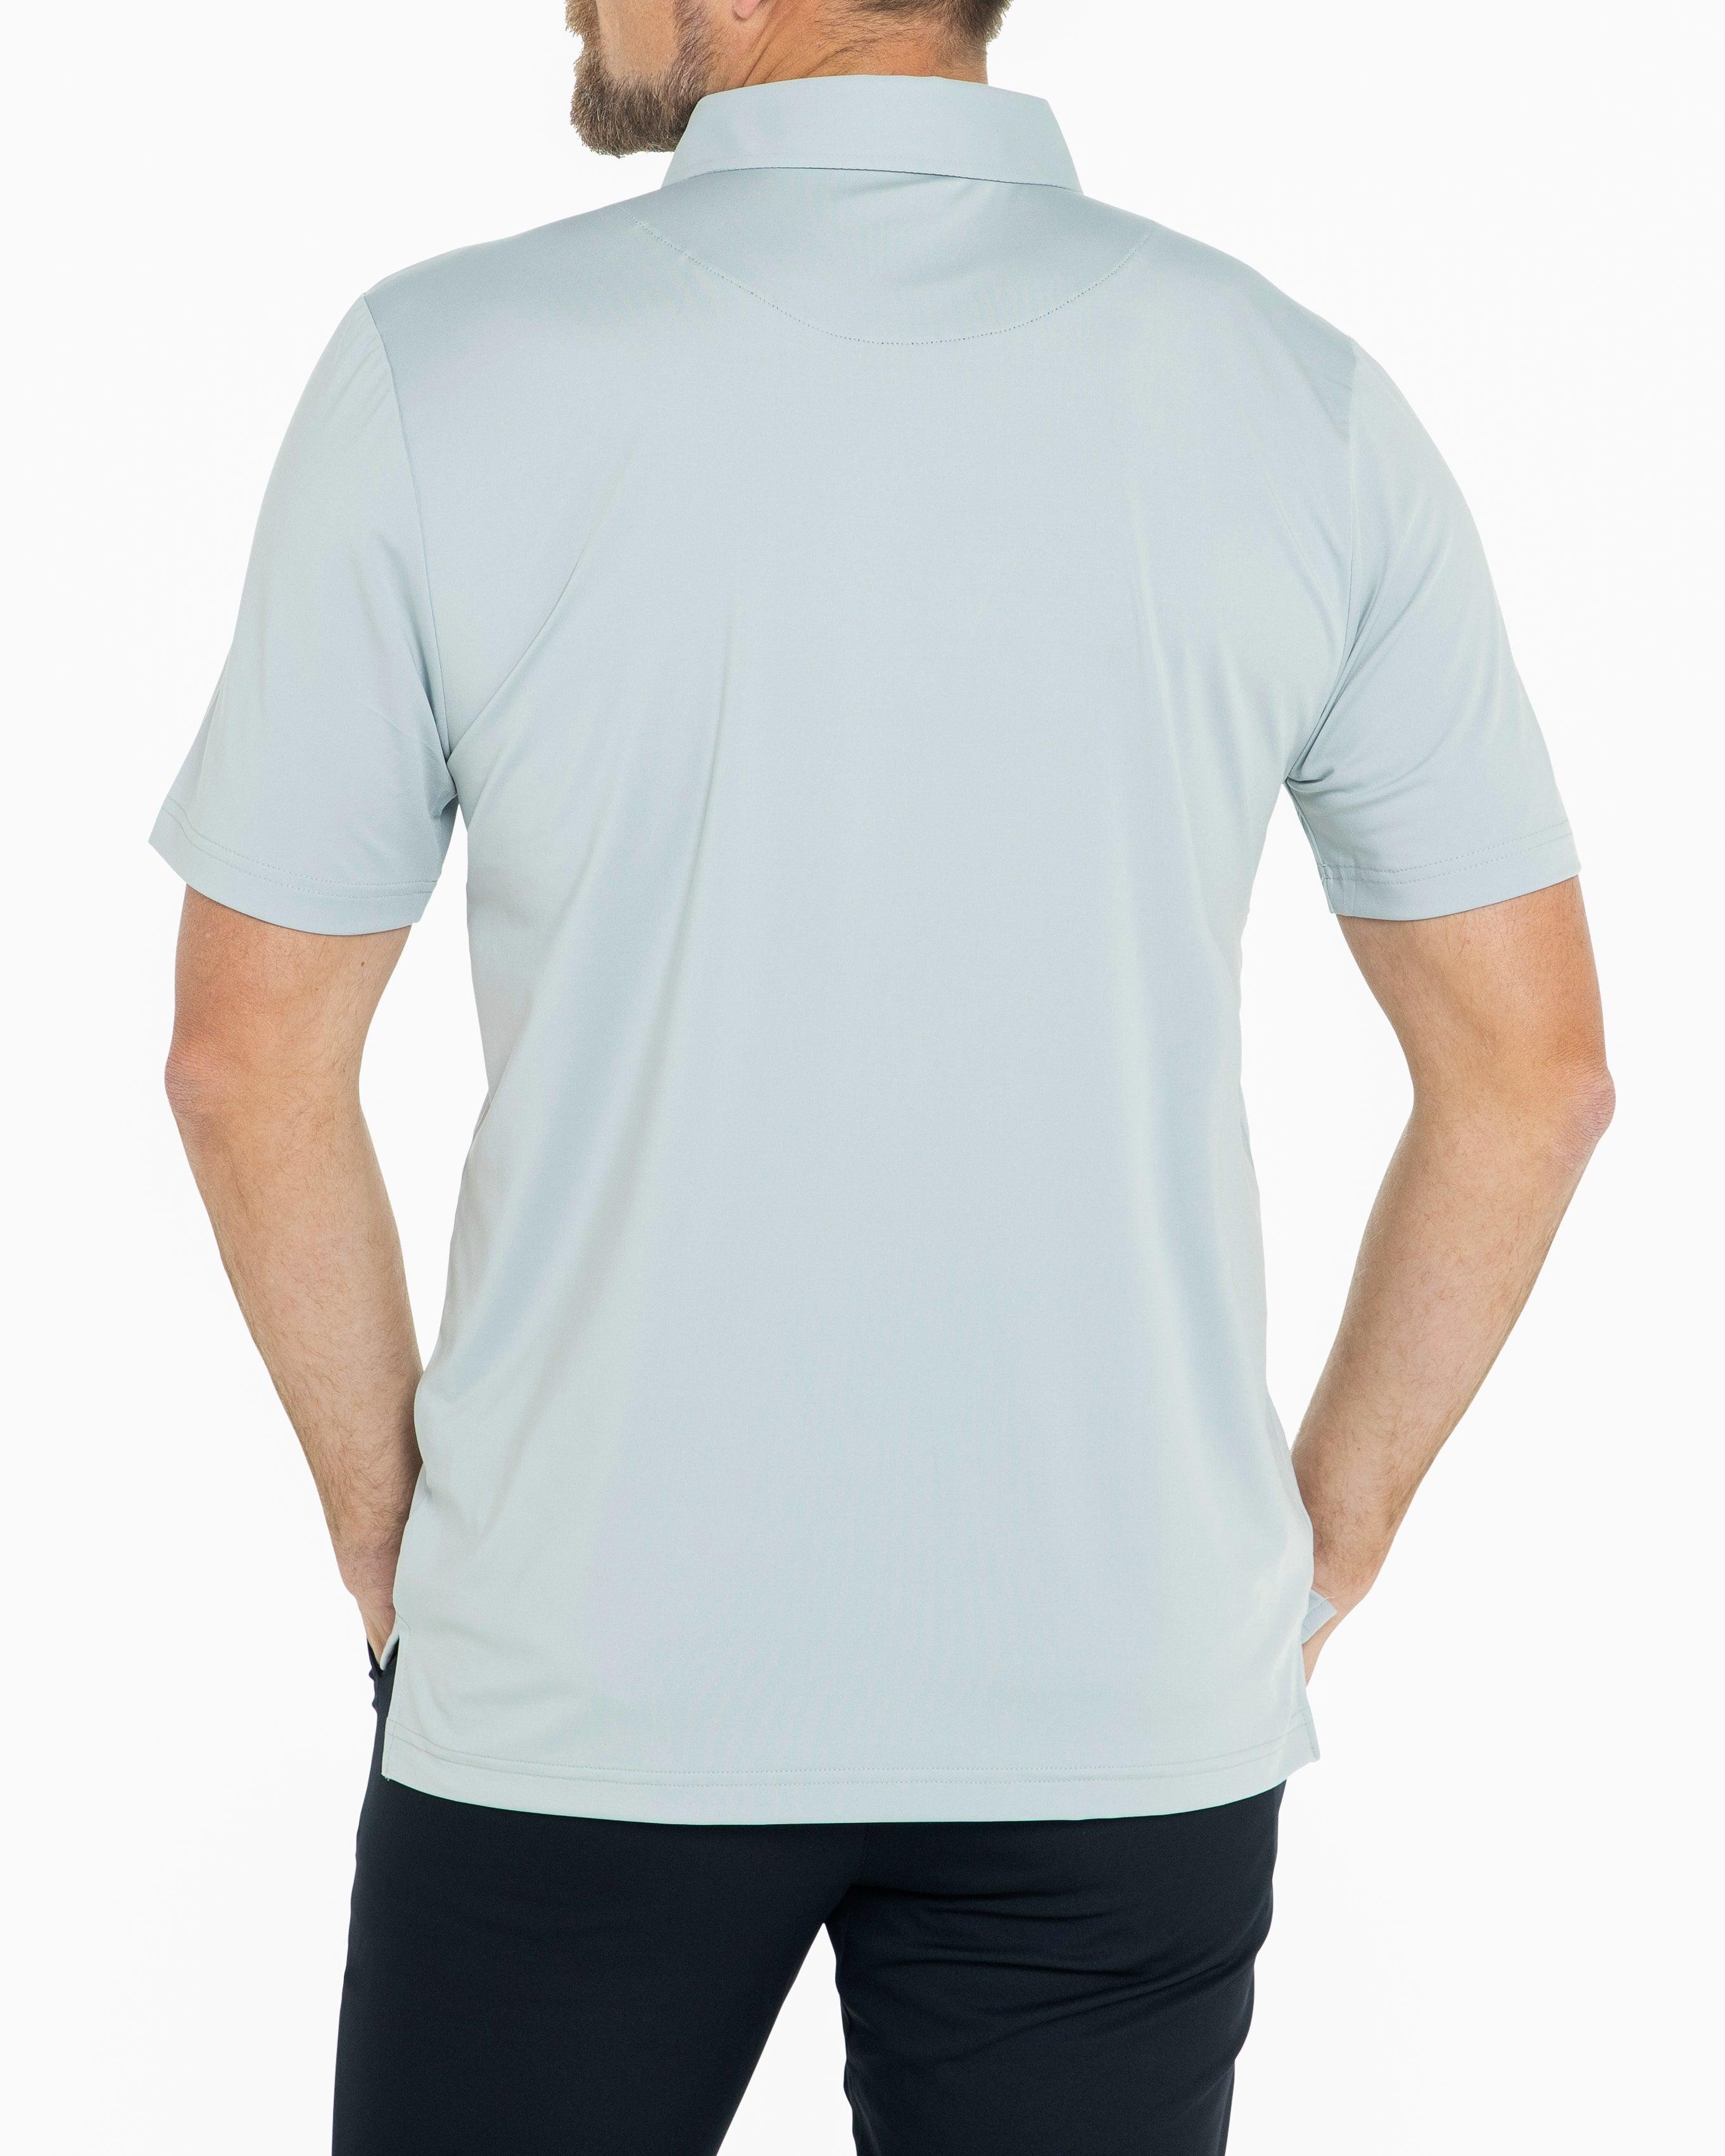 Stinger Polo | Performance Golf Polo From Good Good